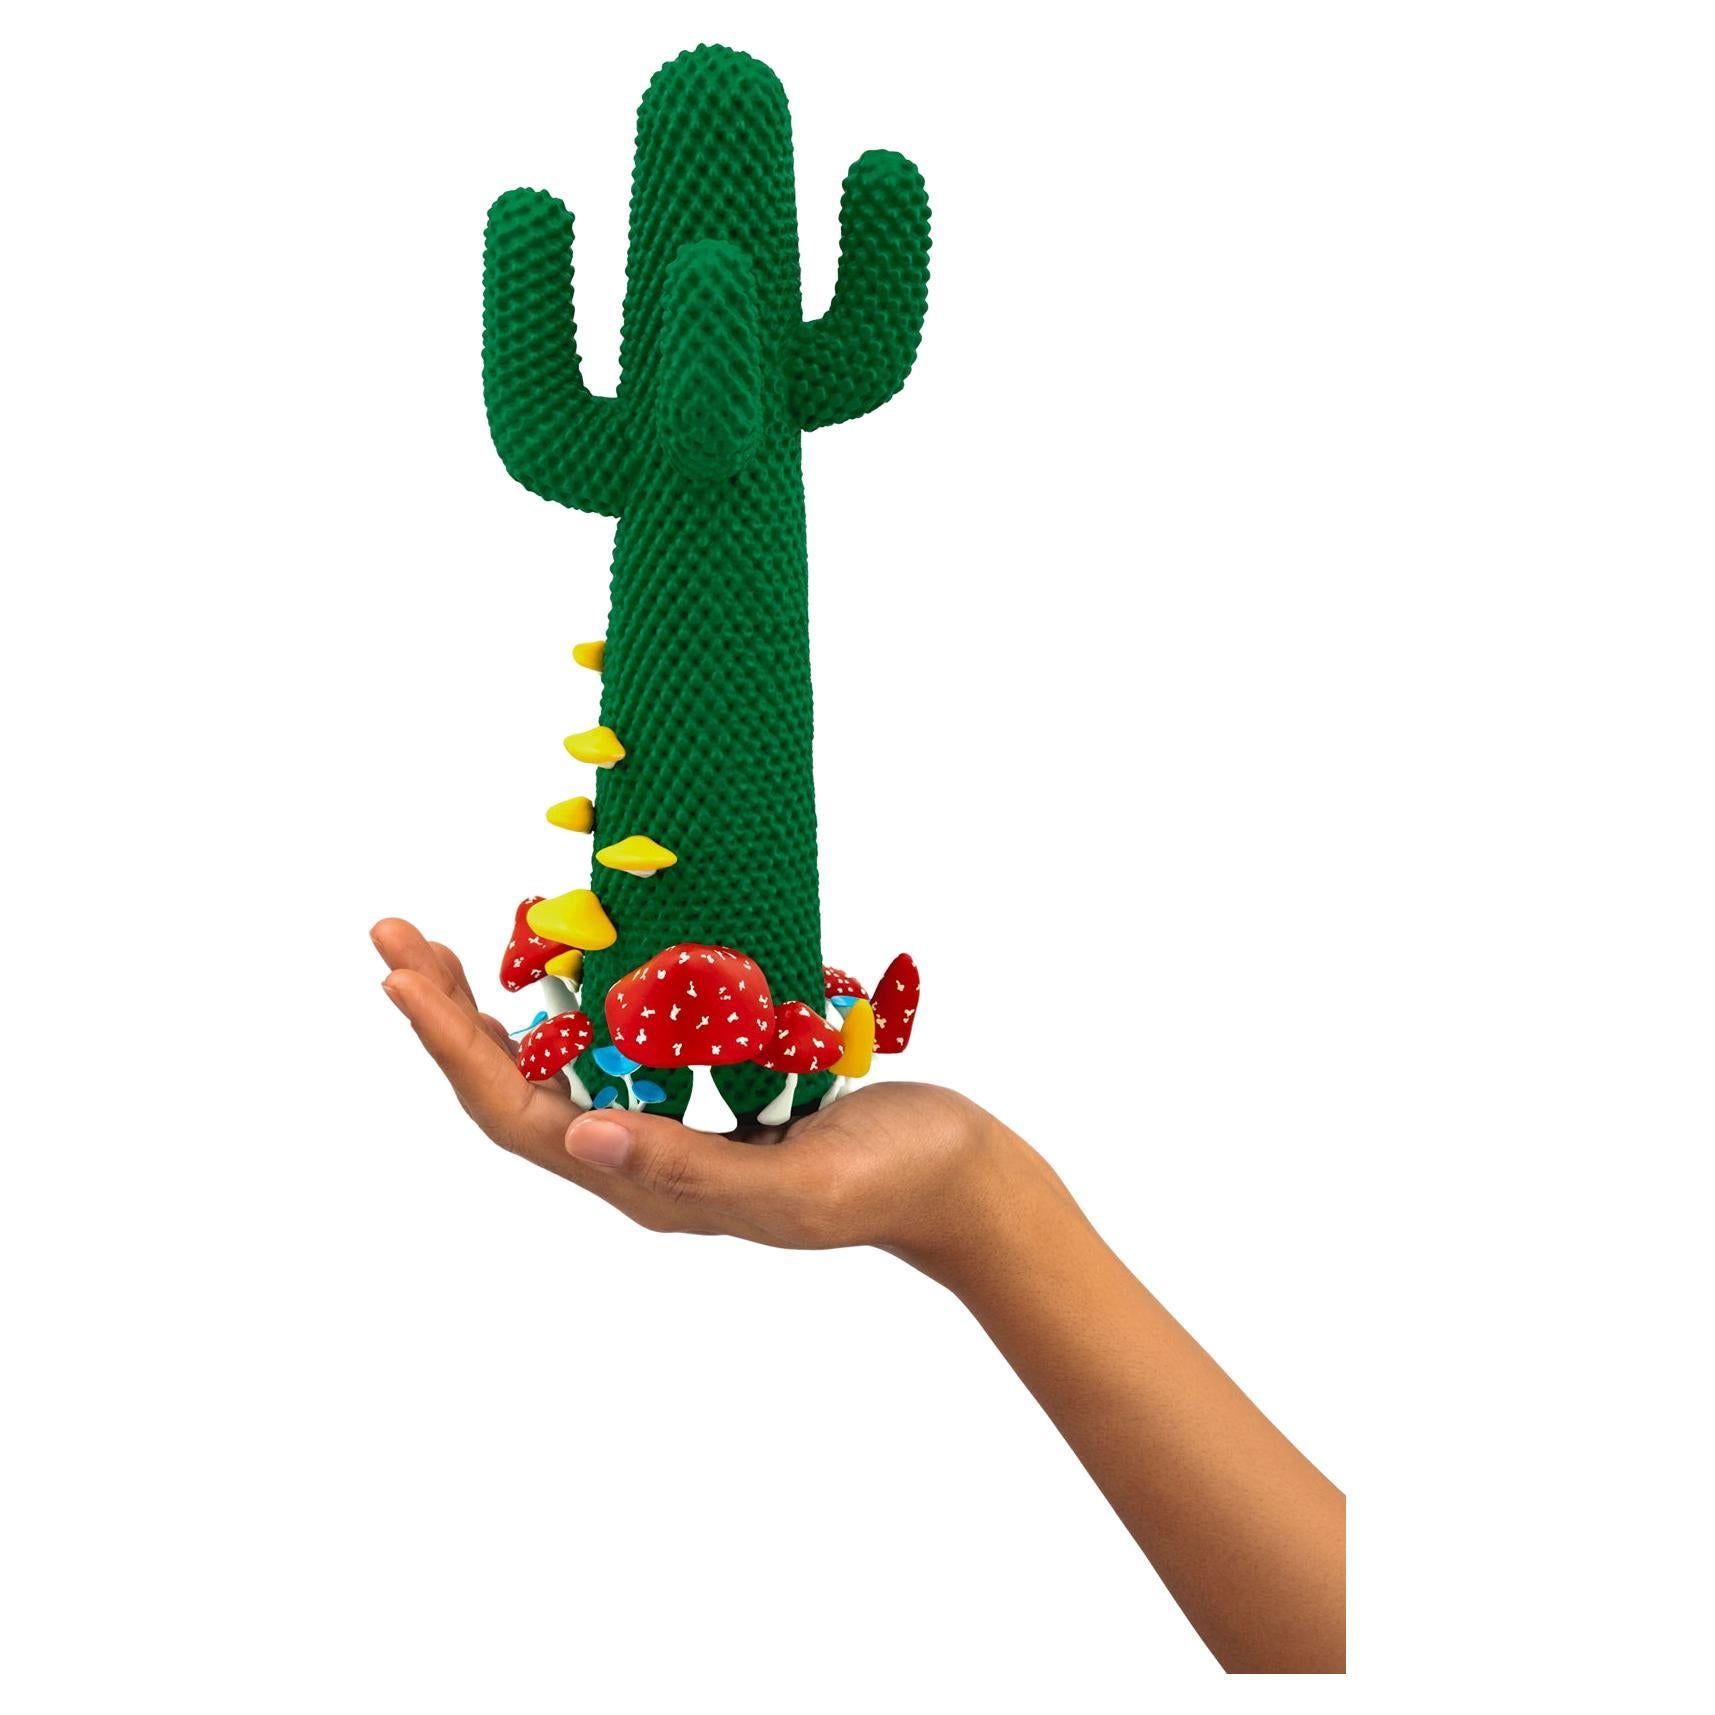 Limited Edition #65/99

Gufram presents the miniaturised version of the Shroom CACTUS® created in collaboration with A$AP Rocky and the artist’s new design studio HOMMEMADE Exactly as the real-size Shroom CACTUS®, the new Guframini piece features